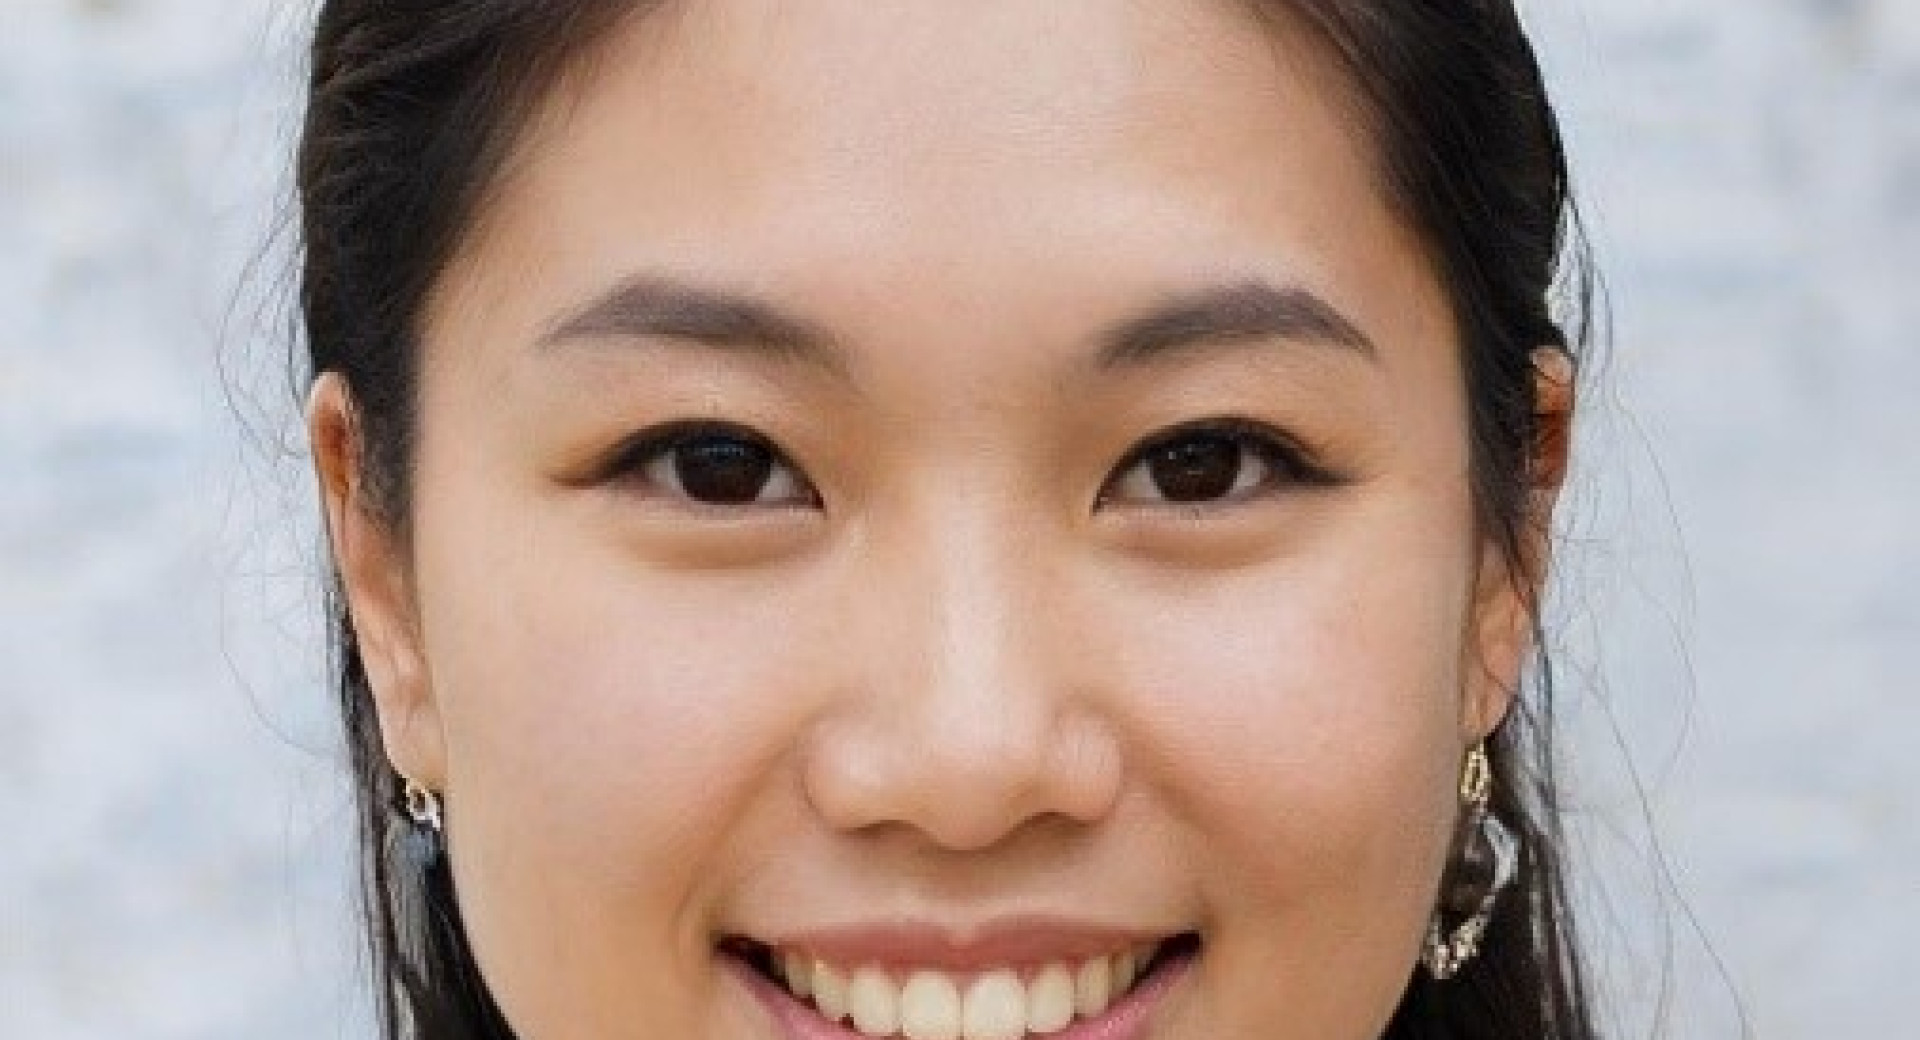 A young Asian woman with dark hair and eyes.